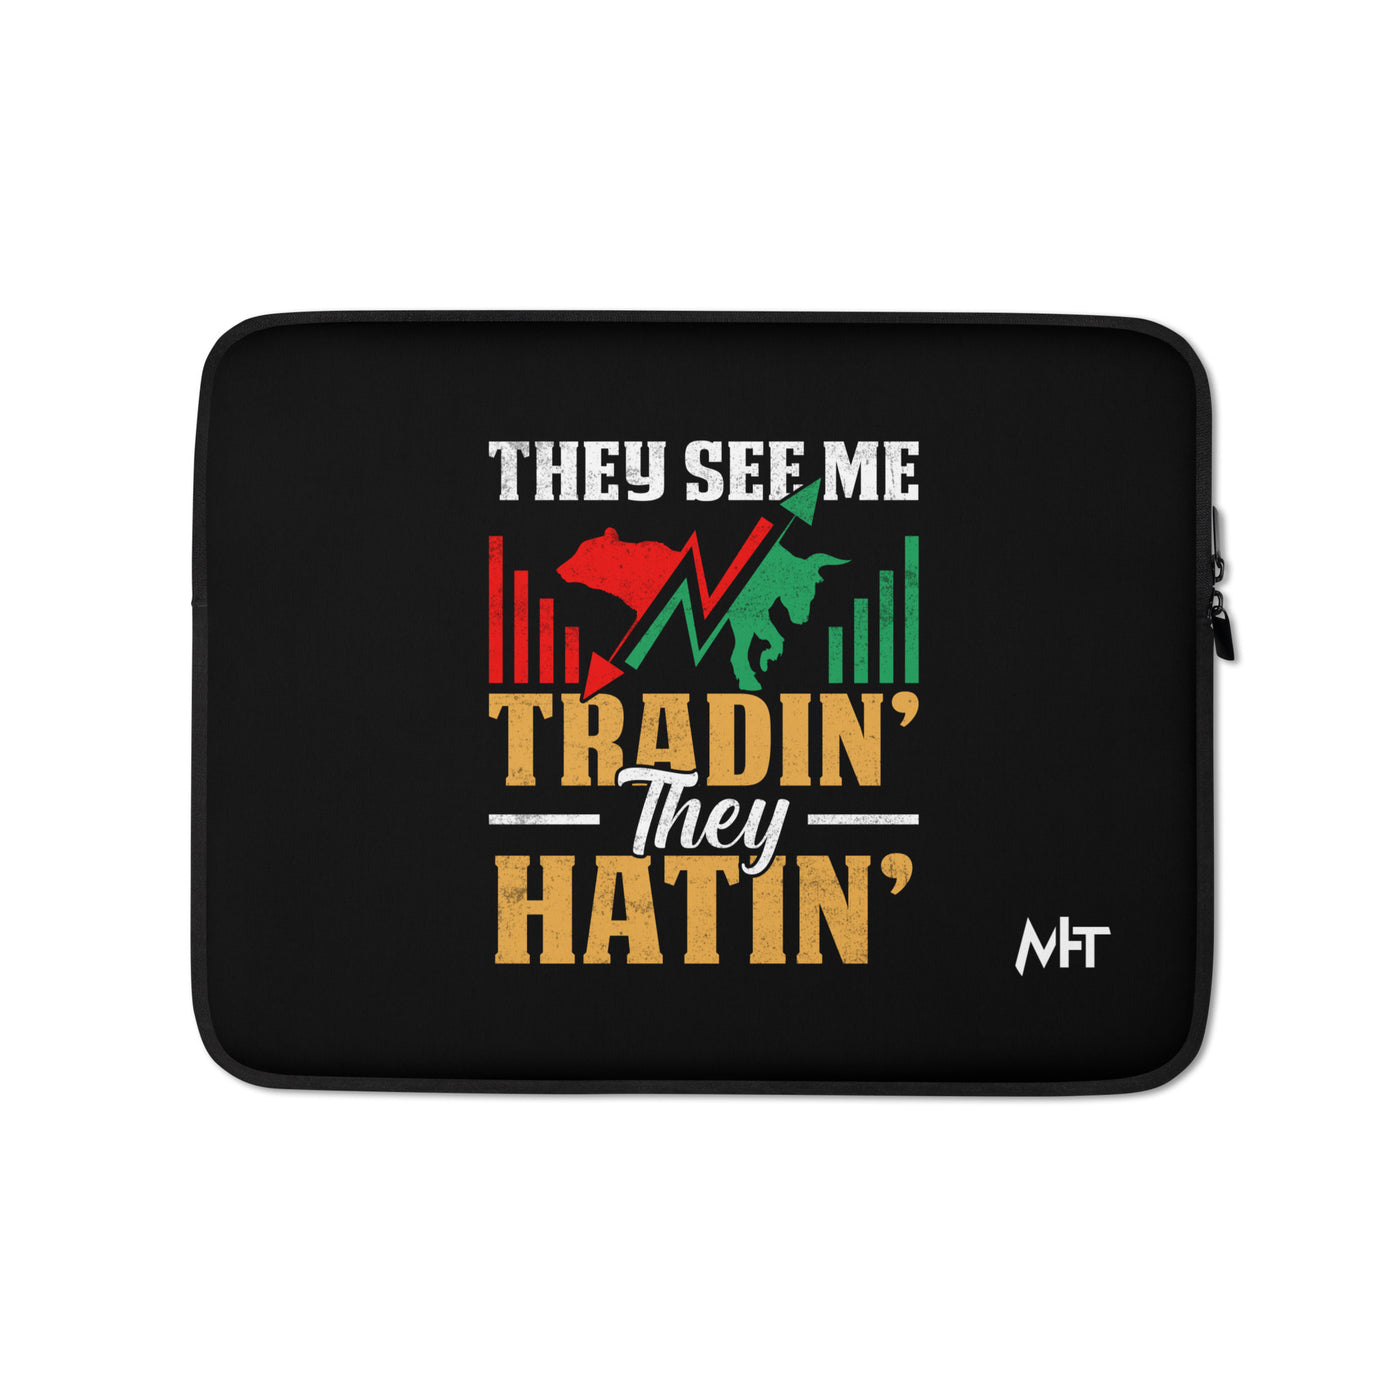 They See me Trading, they Hating - Laptop Sleeve